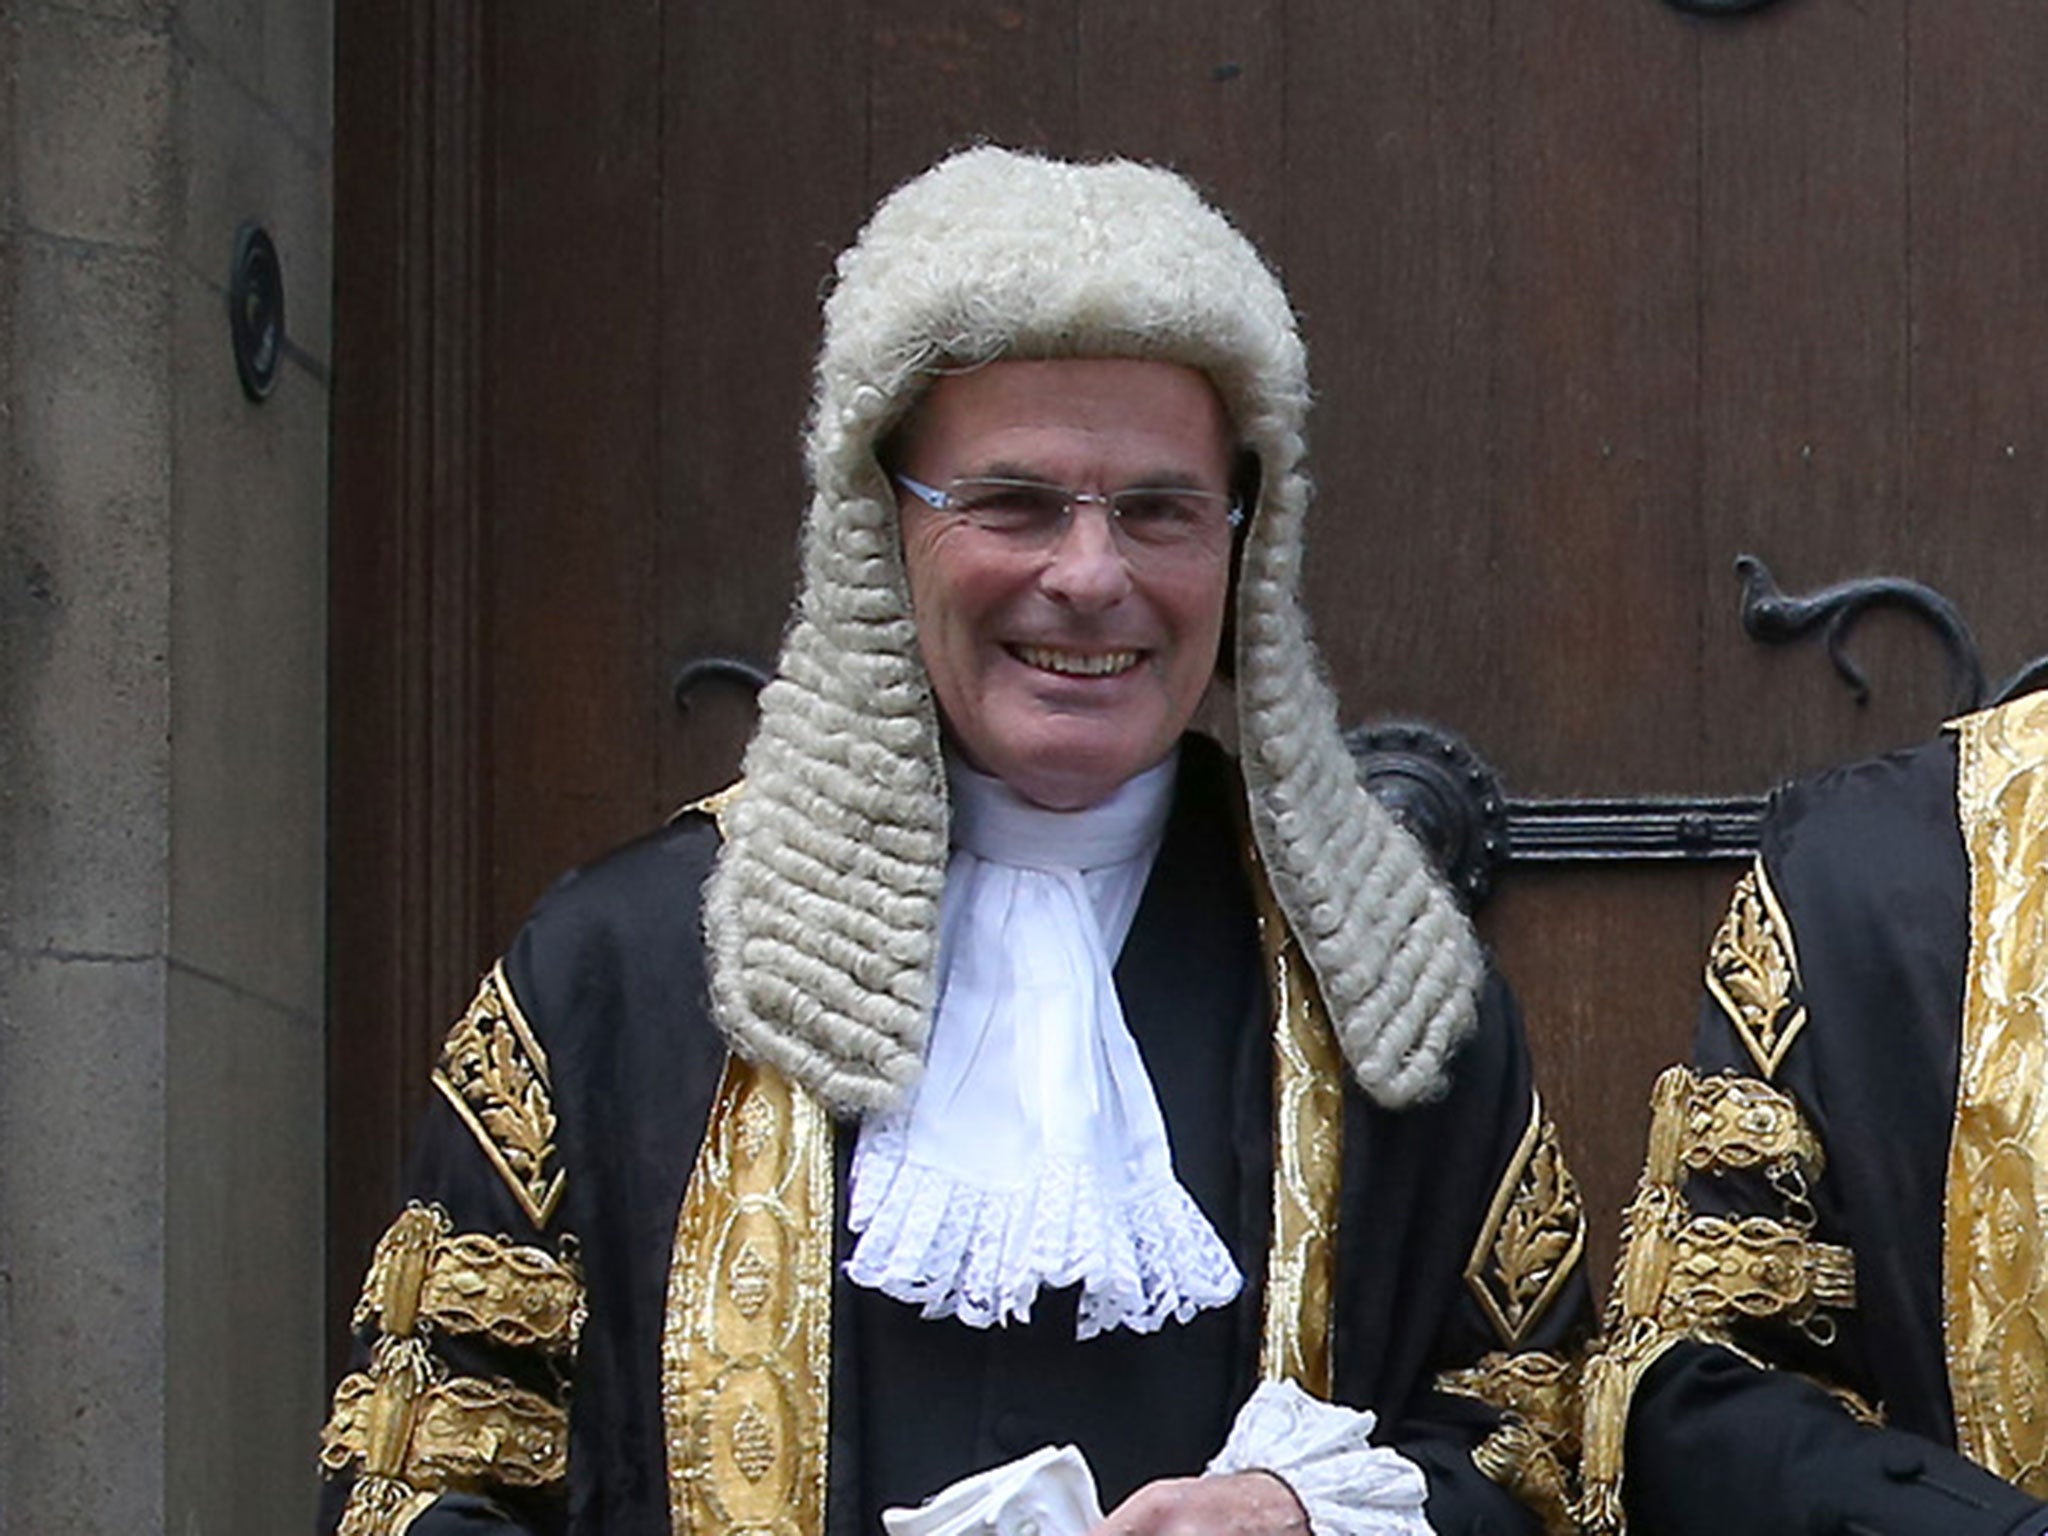 Master of the Rolls, Lord John Anthony Dyson, has told MPs on the House of Commons Justice Committee that soaring court fees will discourage 'ordinary people' from seeking justice